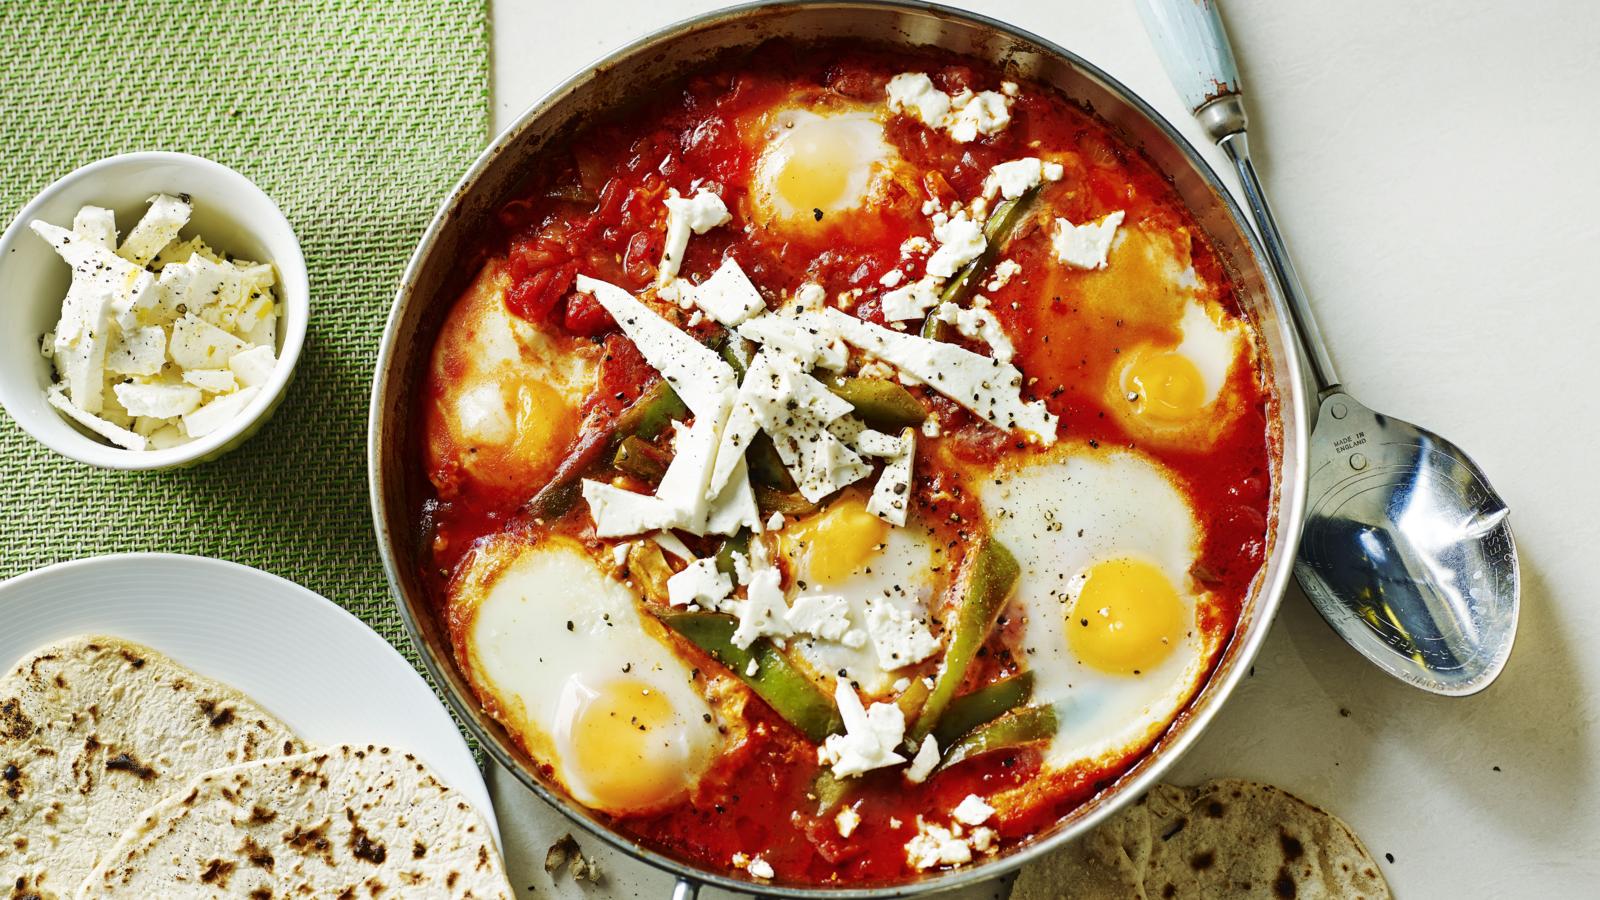 Spiced North African-style eggs recipe - BBC Food